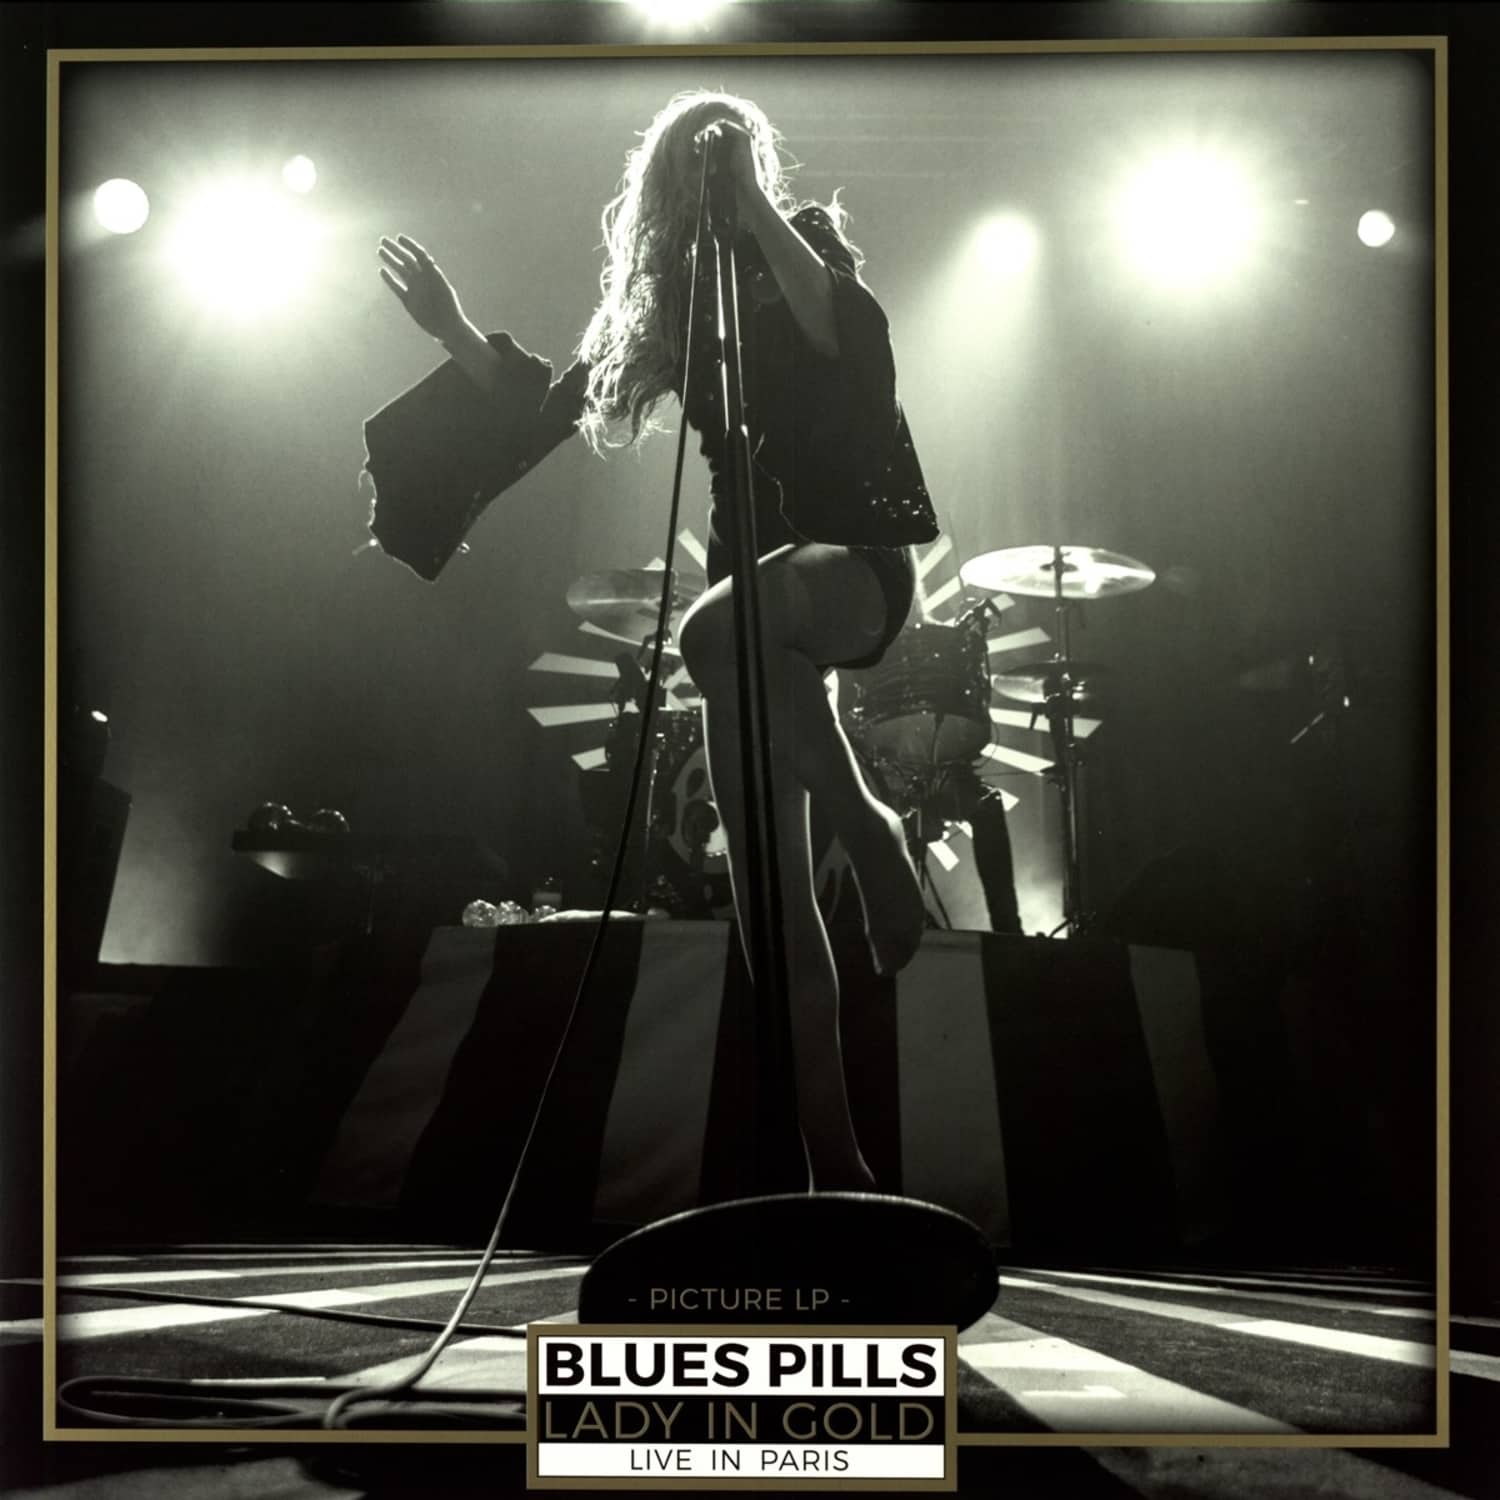 Blues Pills - LADY IN GOLD - LIVE IN PARIS 